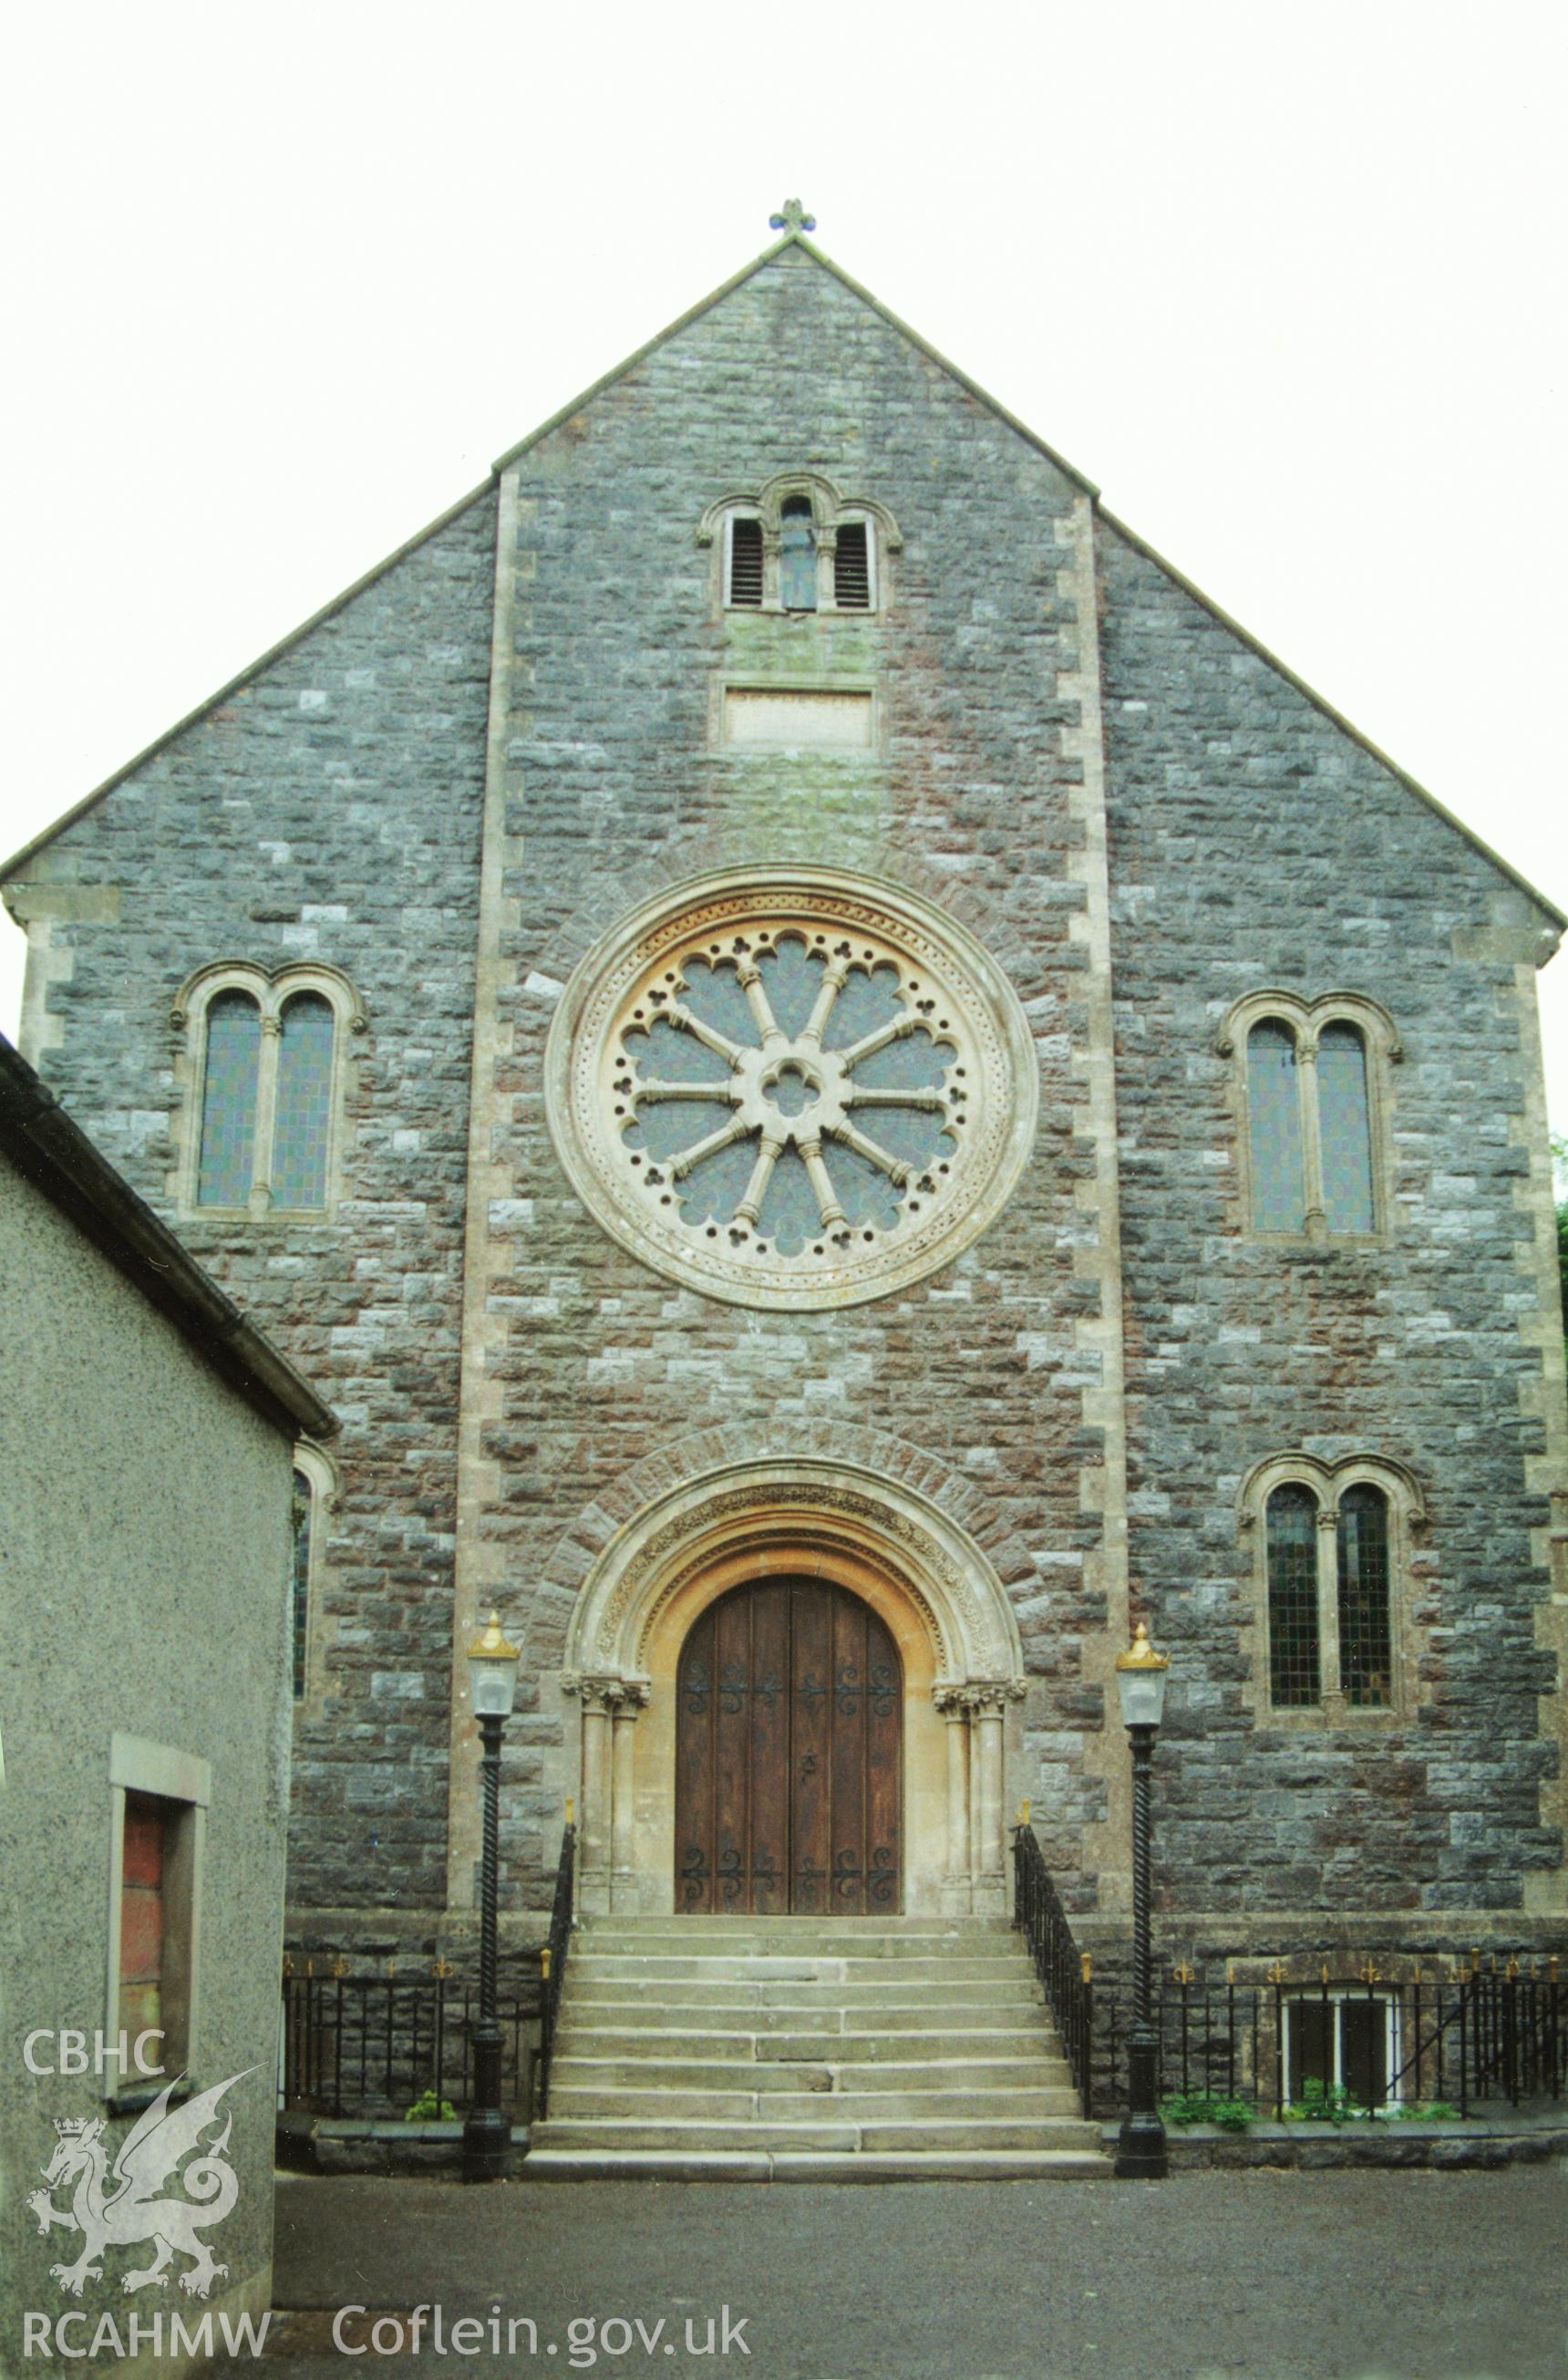 Digital copy of a colour photograph showing an exterior view of Bethesda English Baptist Chapel, Narberth,  taken by Robert Scourfield, 1996.